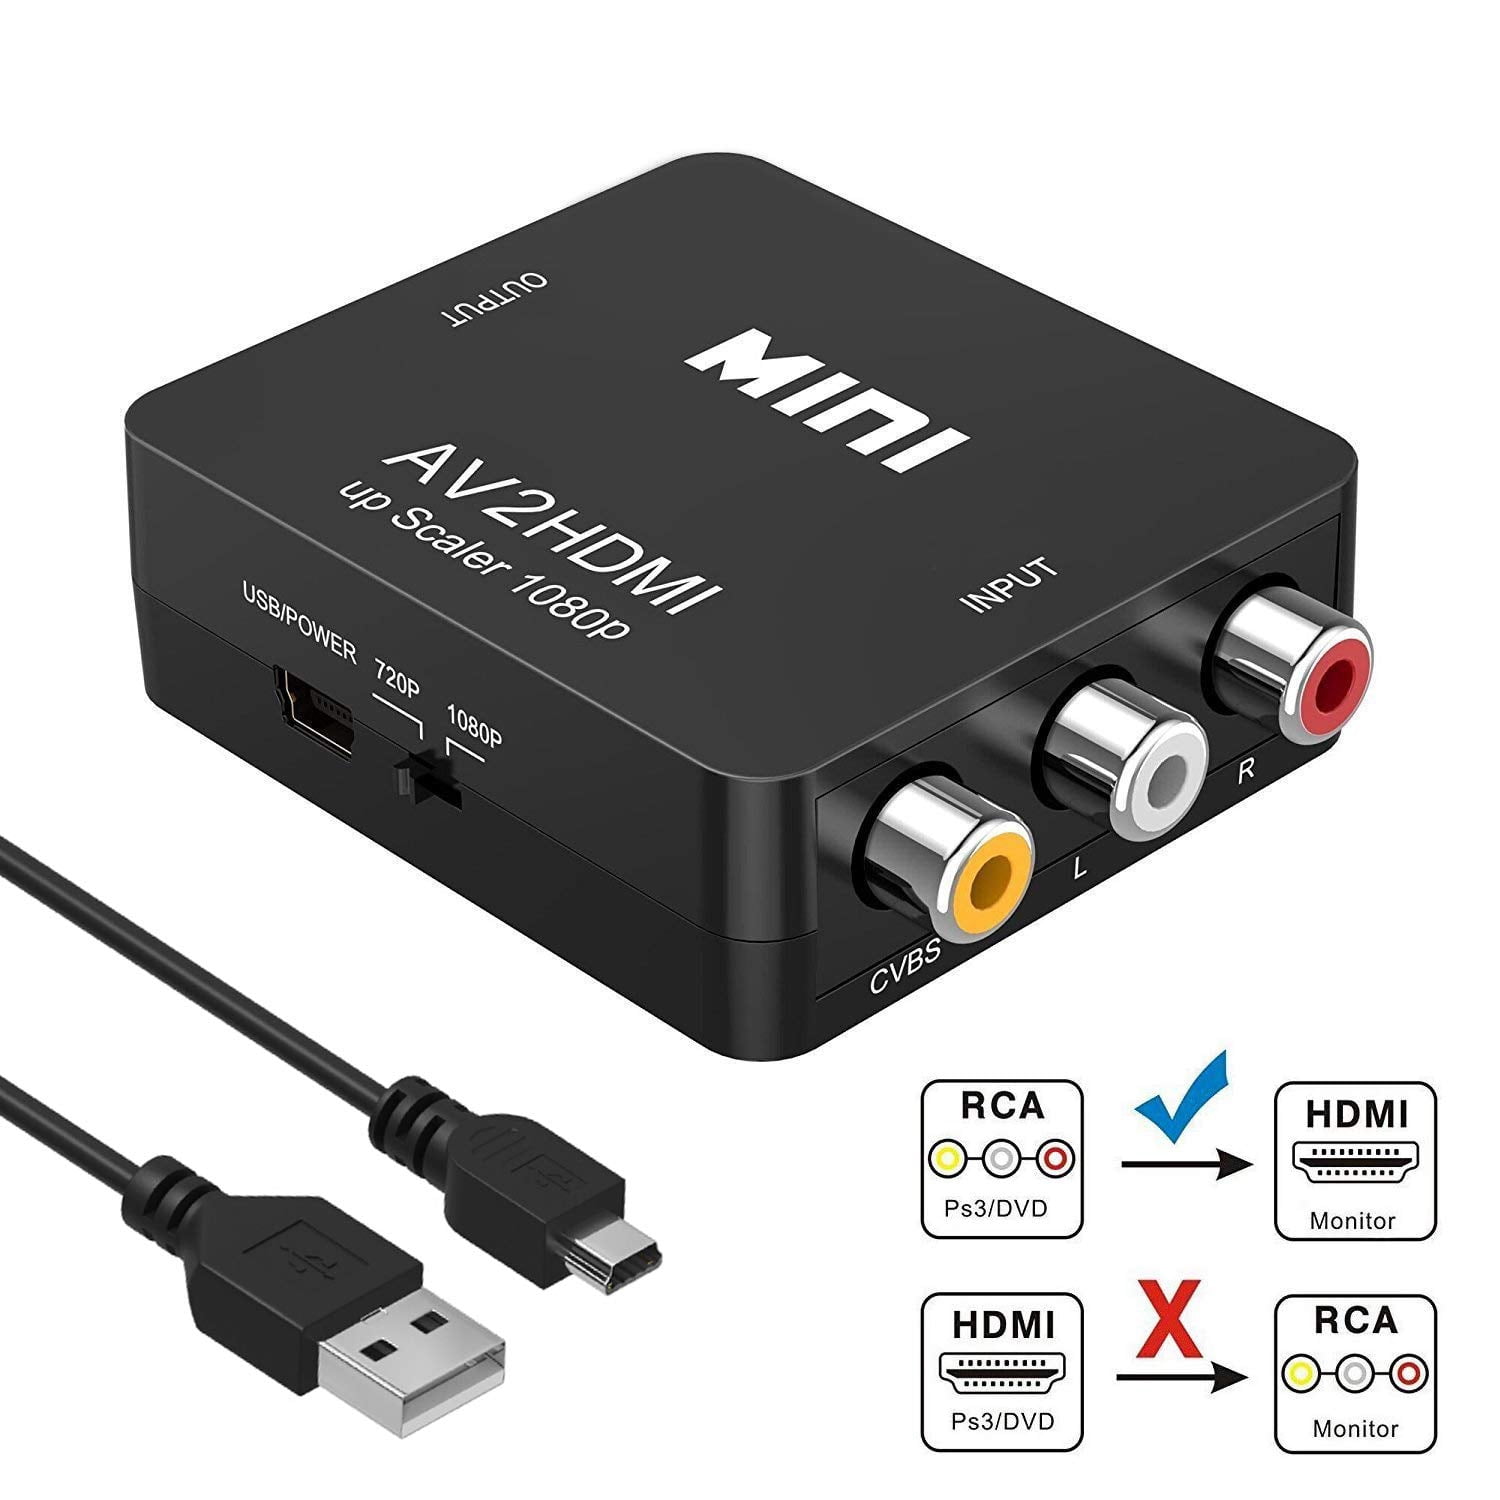 RCA to HDMI, Coolmade 1080P Mini RCA Composite CVBS AV to HDMI Video Audio Converter Adapter Supporting PAL/NTSC with USB Cable for PC Laptop Xbox PS4 PS3 TV STB VCR